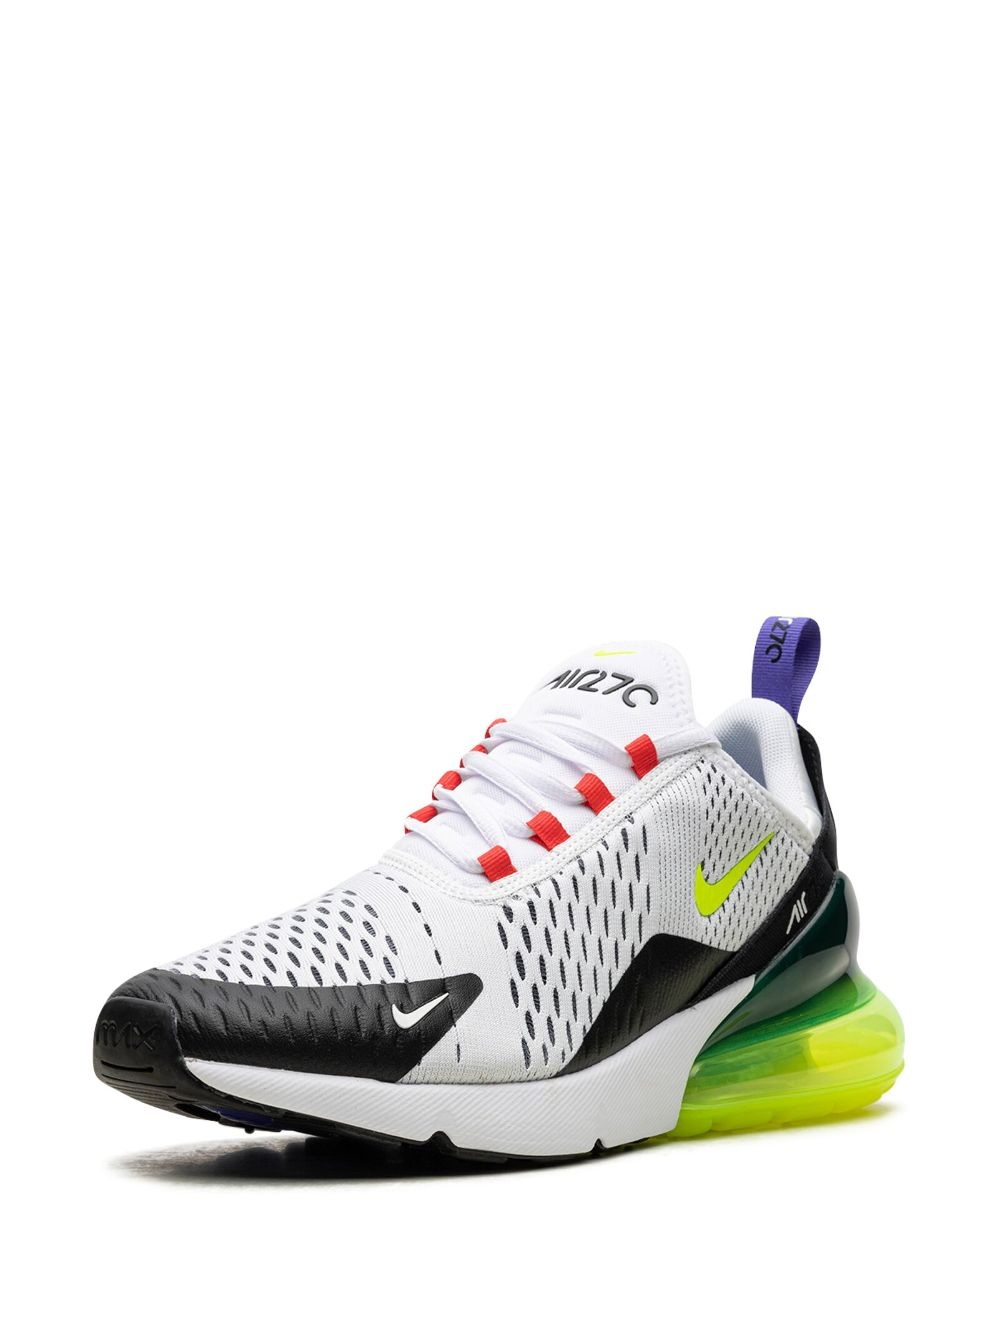 Air Max 270 "White/Volt/Siren Red" sneakers - 4